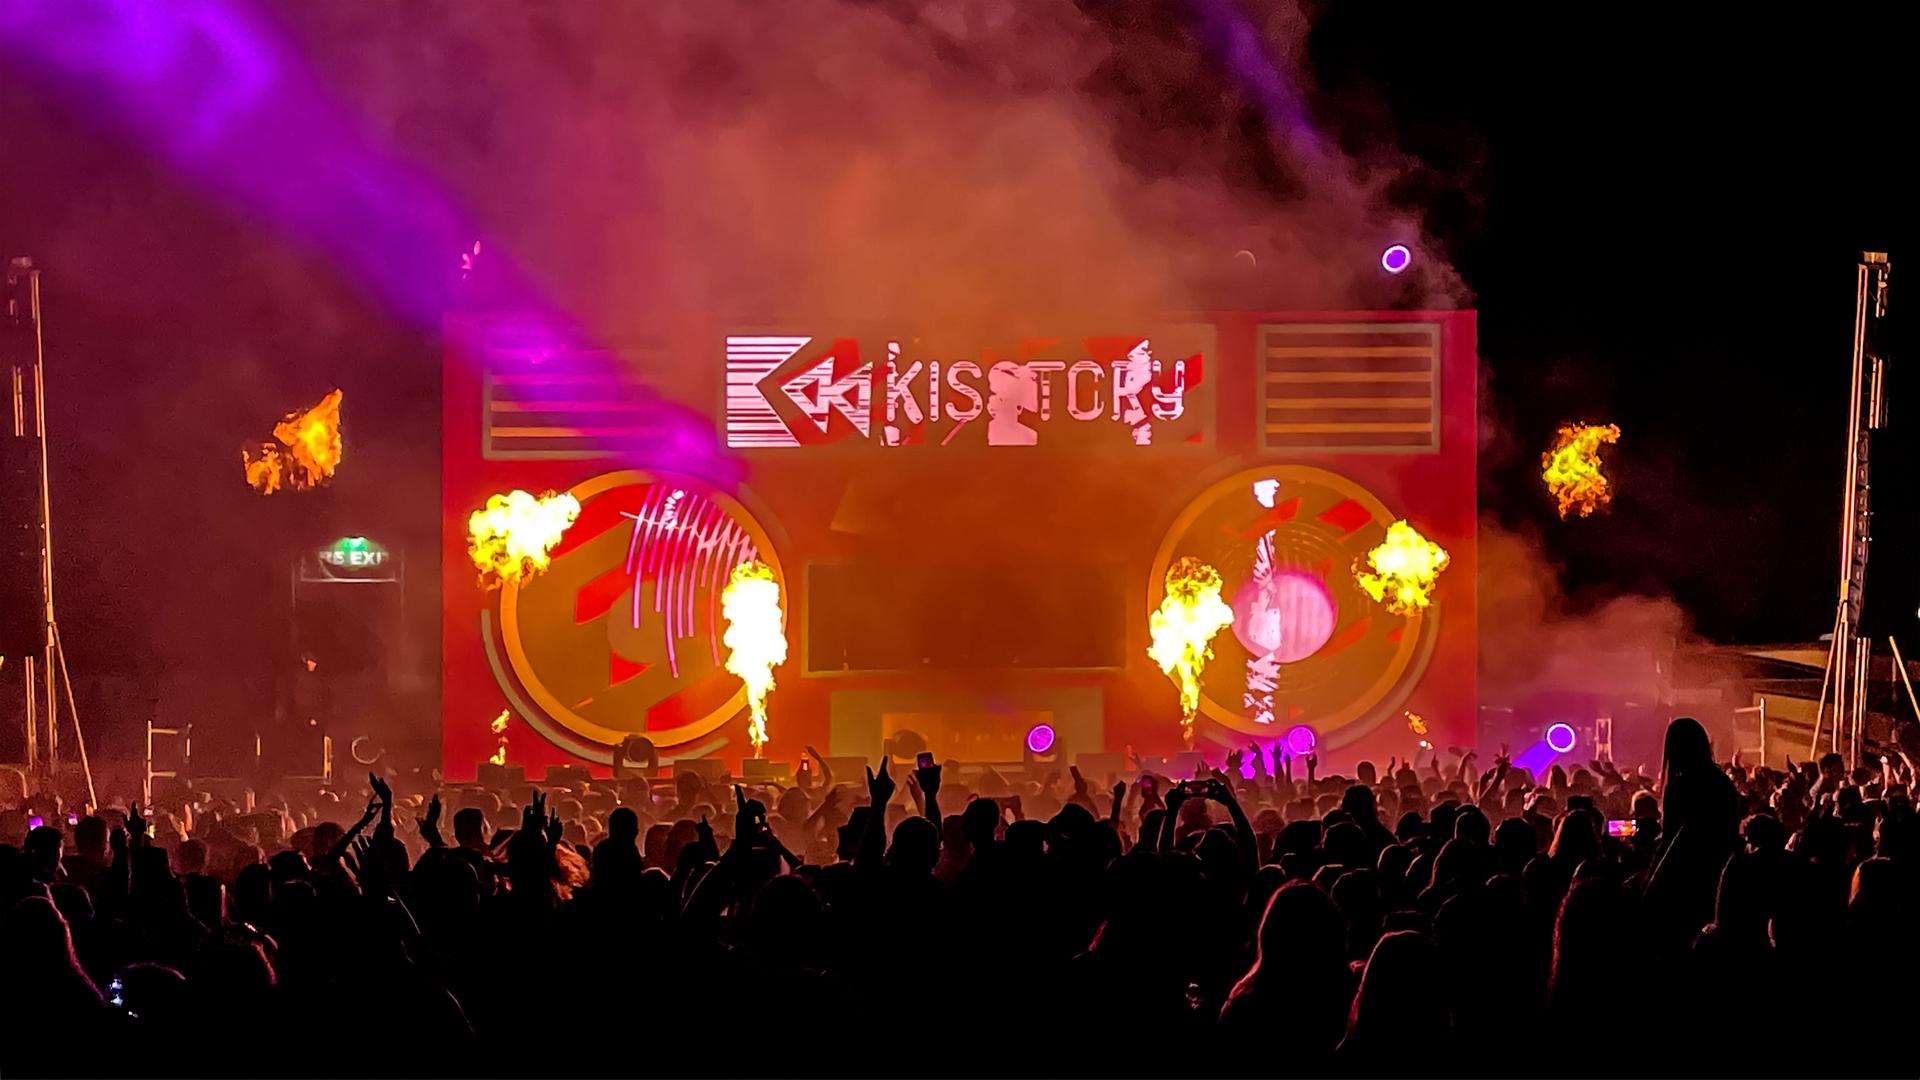 Kisstory goes all night with PROLIGHTS Panorama WBX